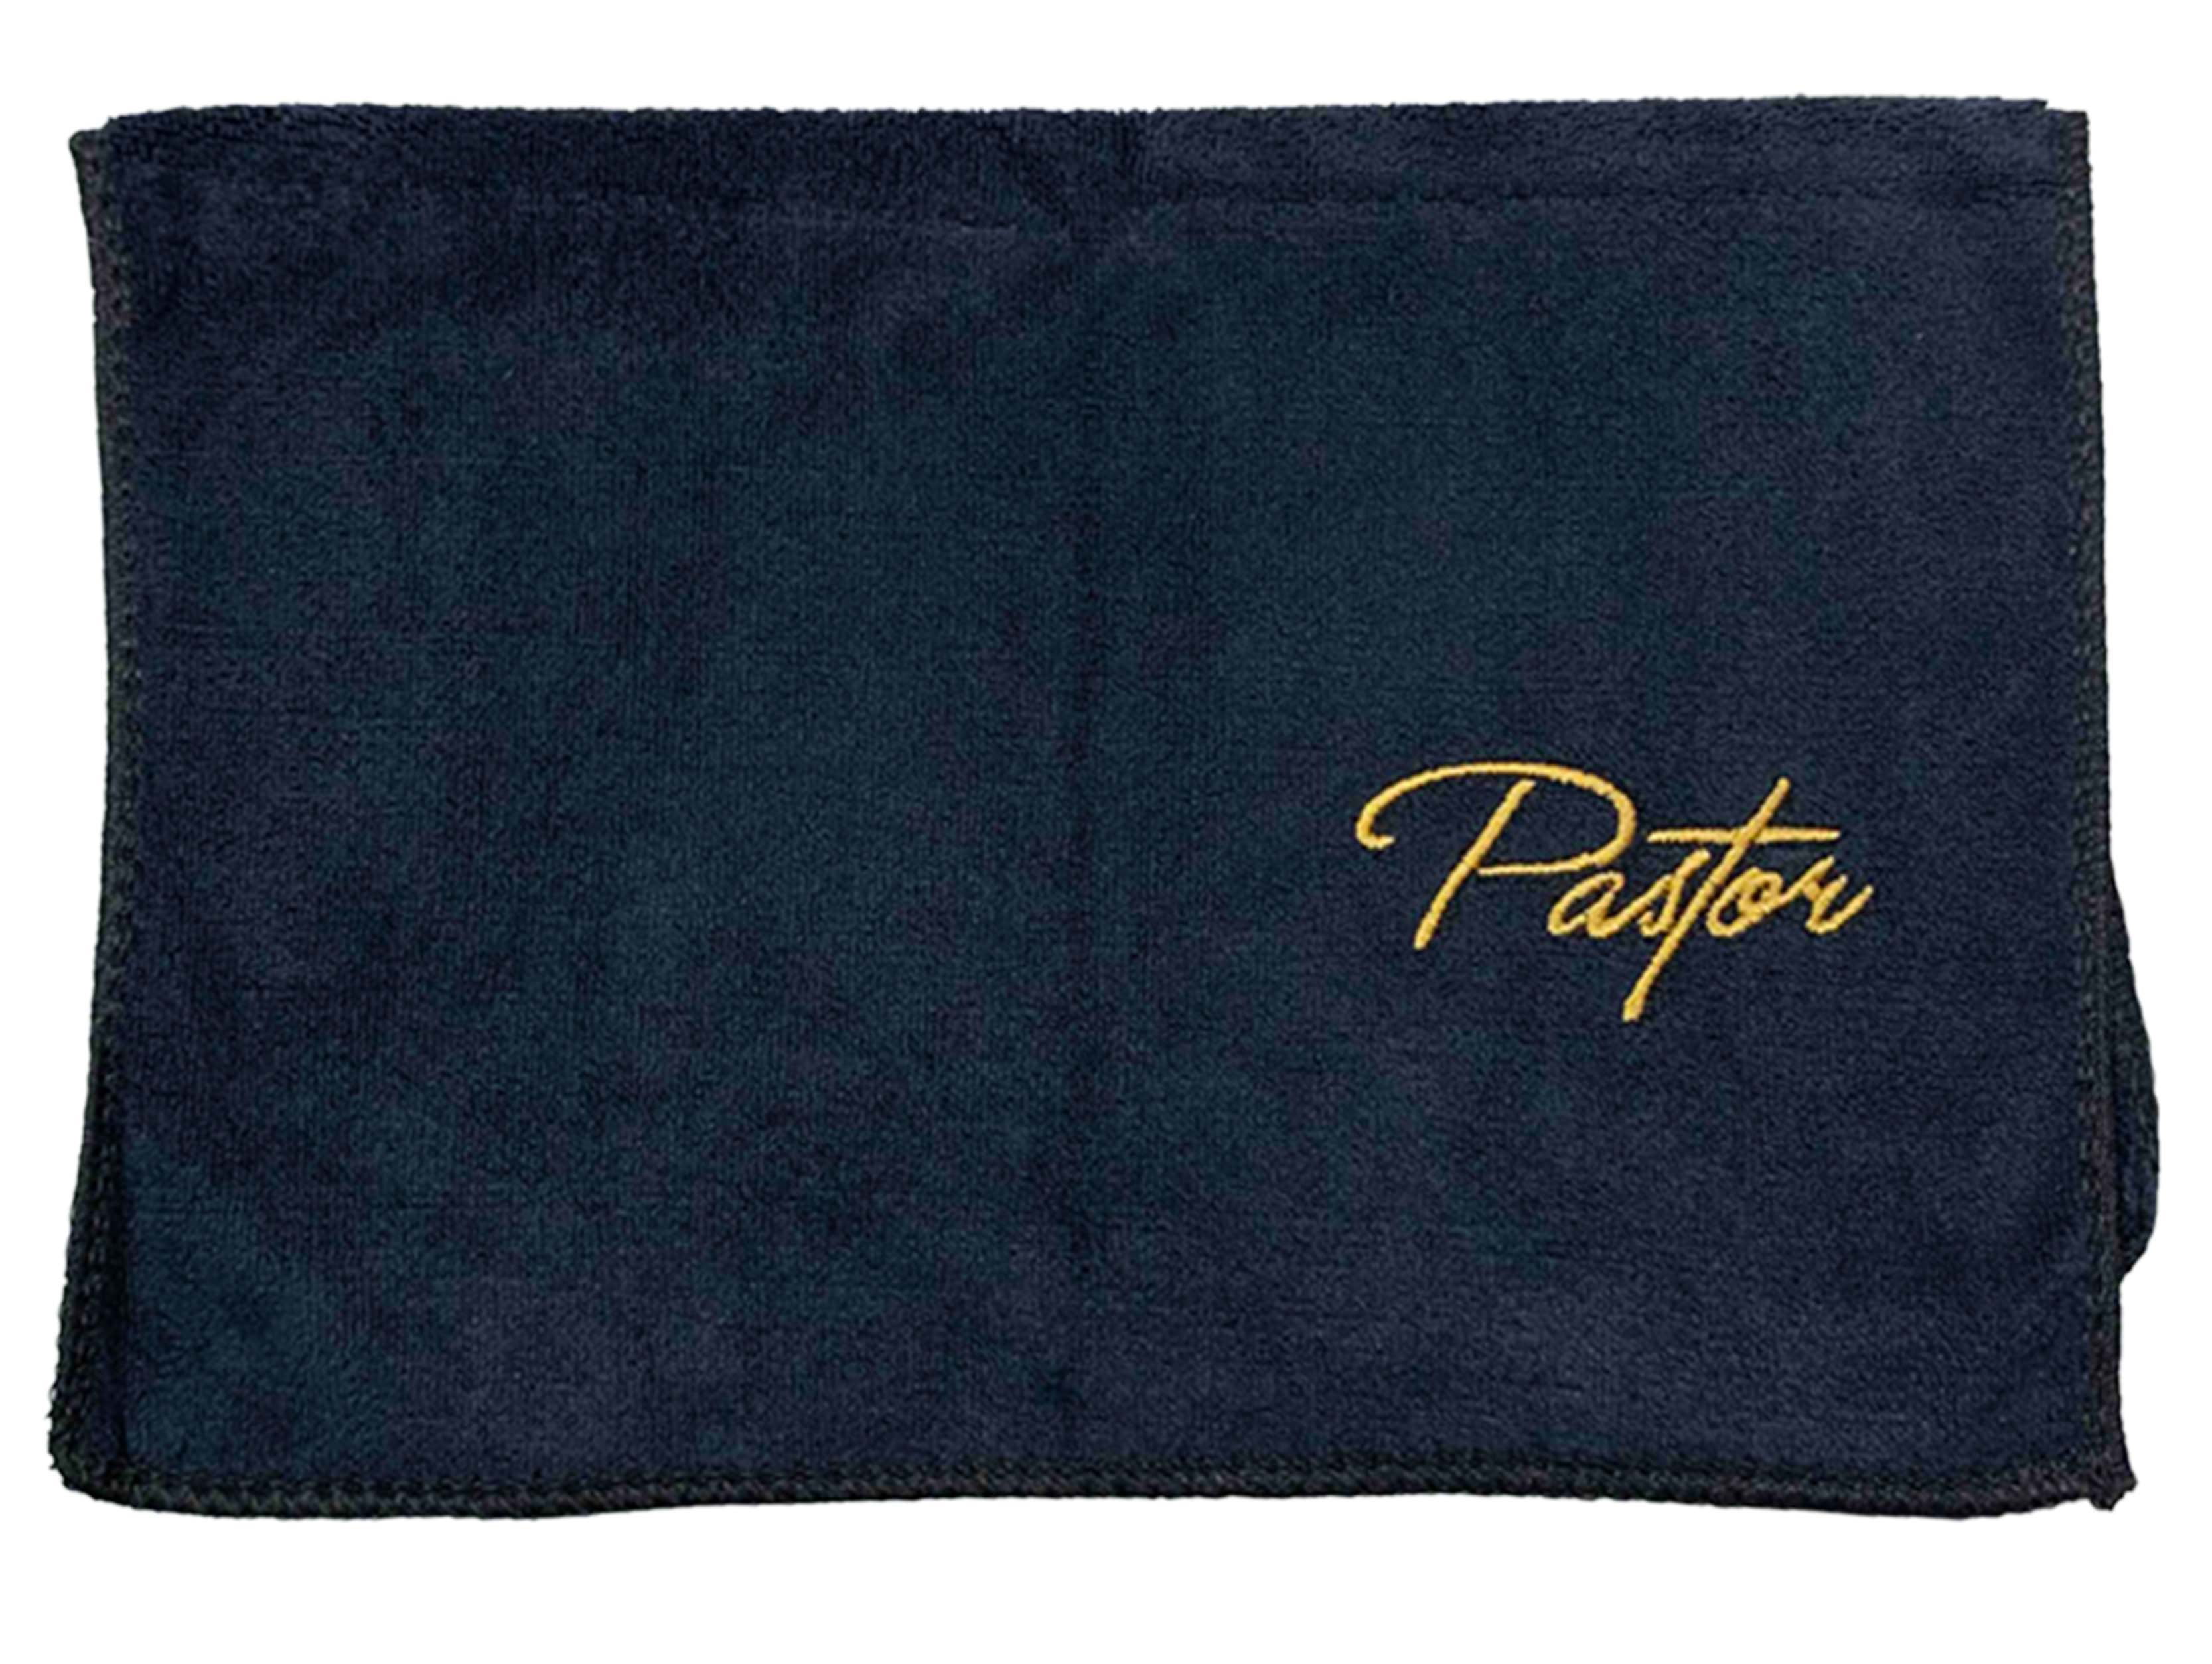 14773x Towel Pastor Black With Gold Lettering